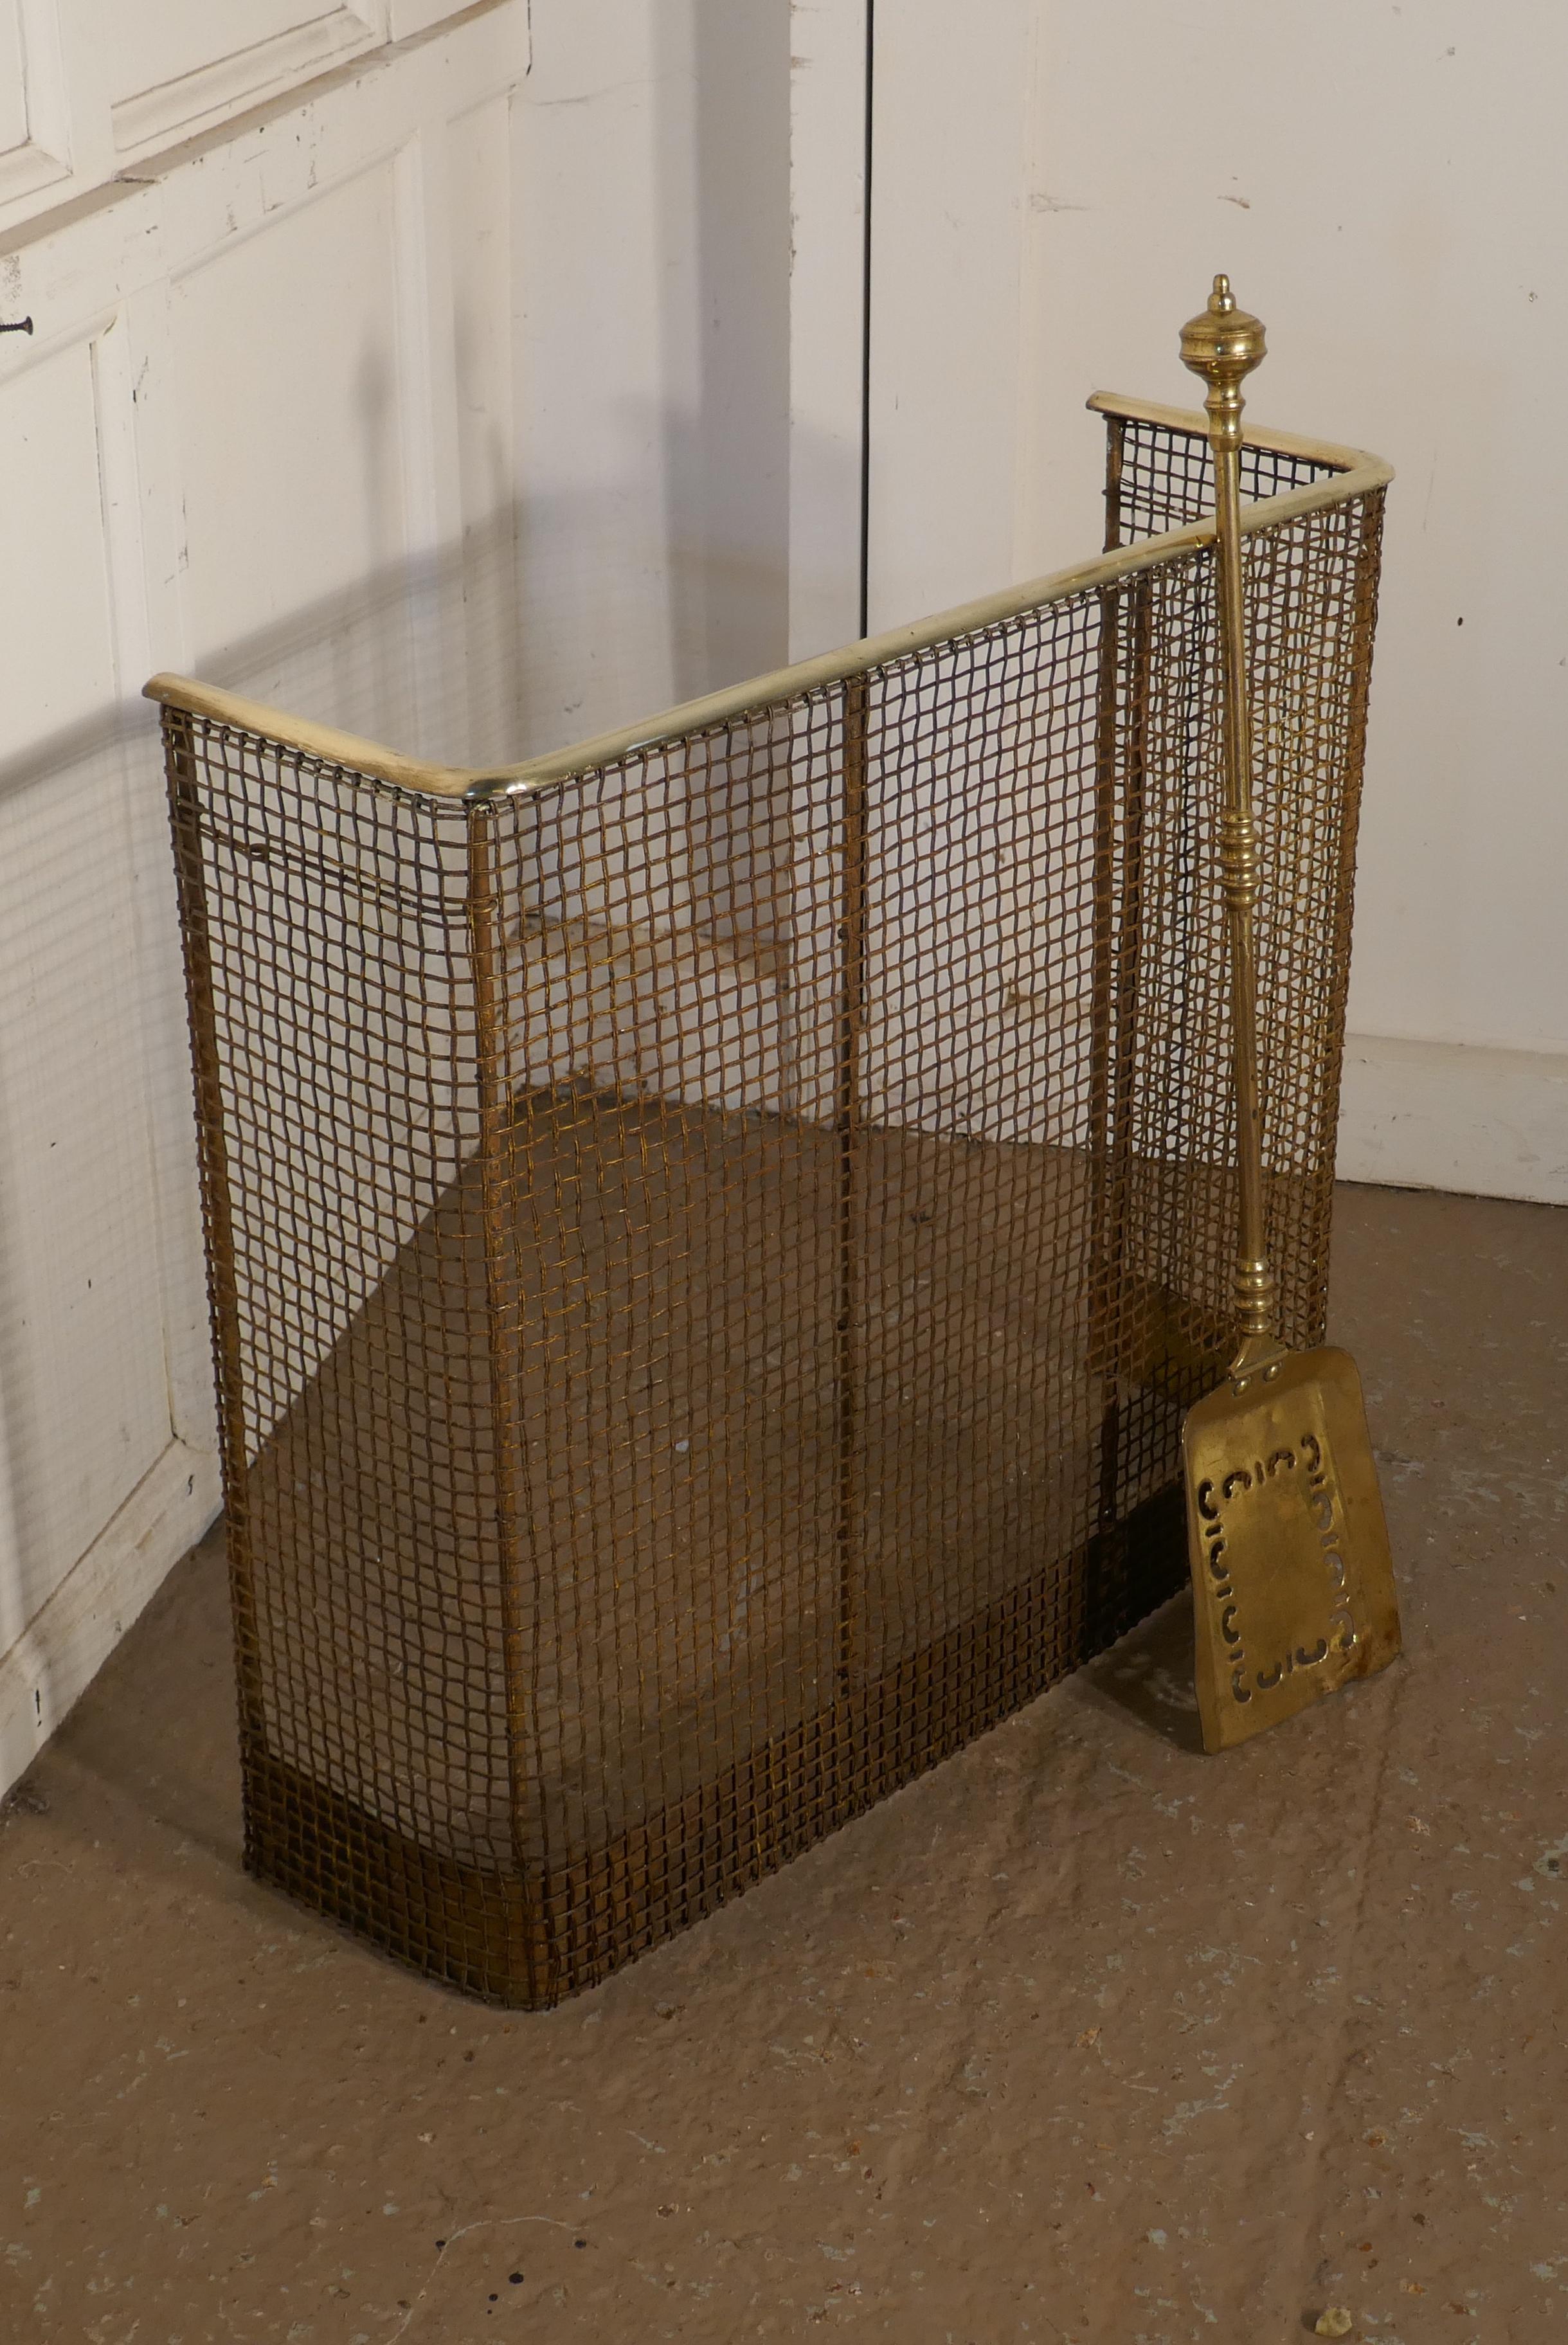 A petite high Victorian nursery fire guard, brass fender. 

A early Victorian antique fire guard often known as a nursery guard as it completely surrounds the fire, this one come with its long handled brass shovel
The fender has a slightly curved